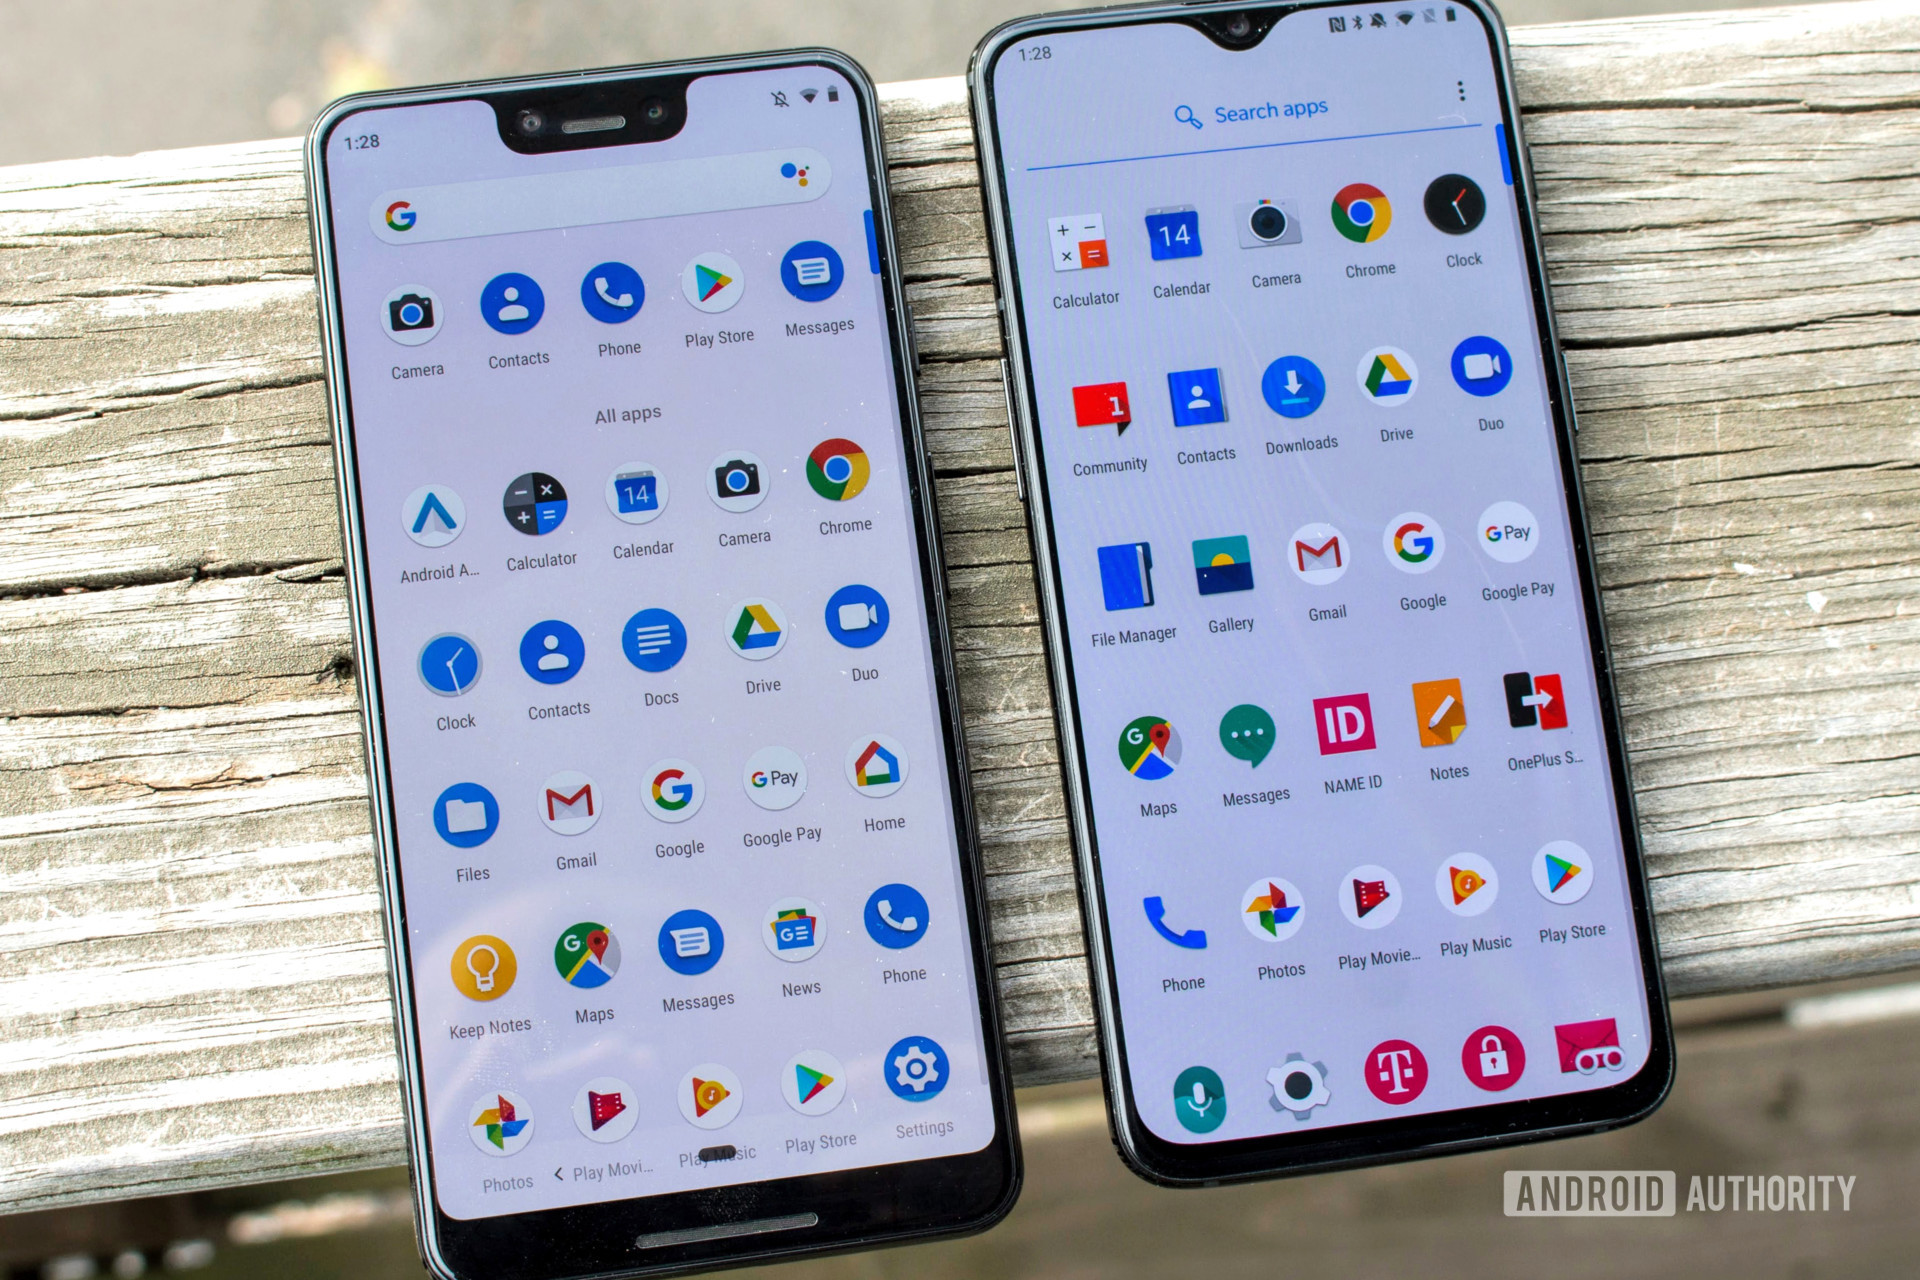 The OnePlus 6T next to the Google Pixel 3 XL.